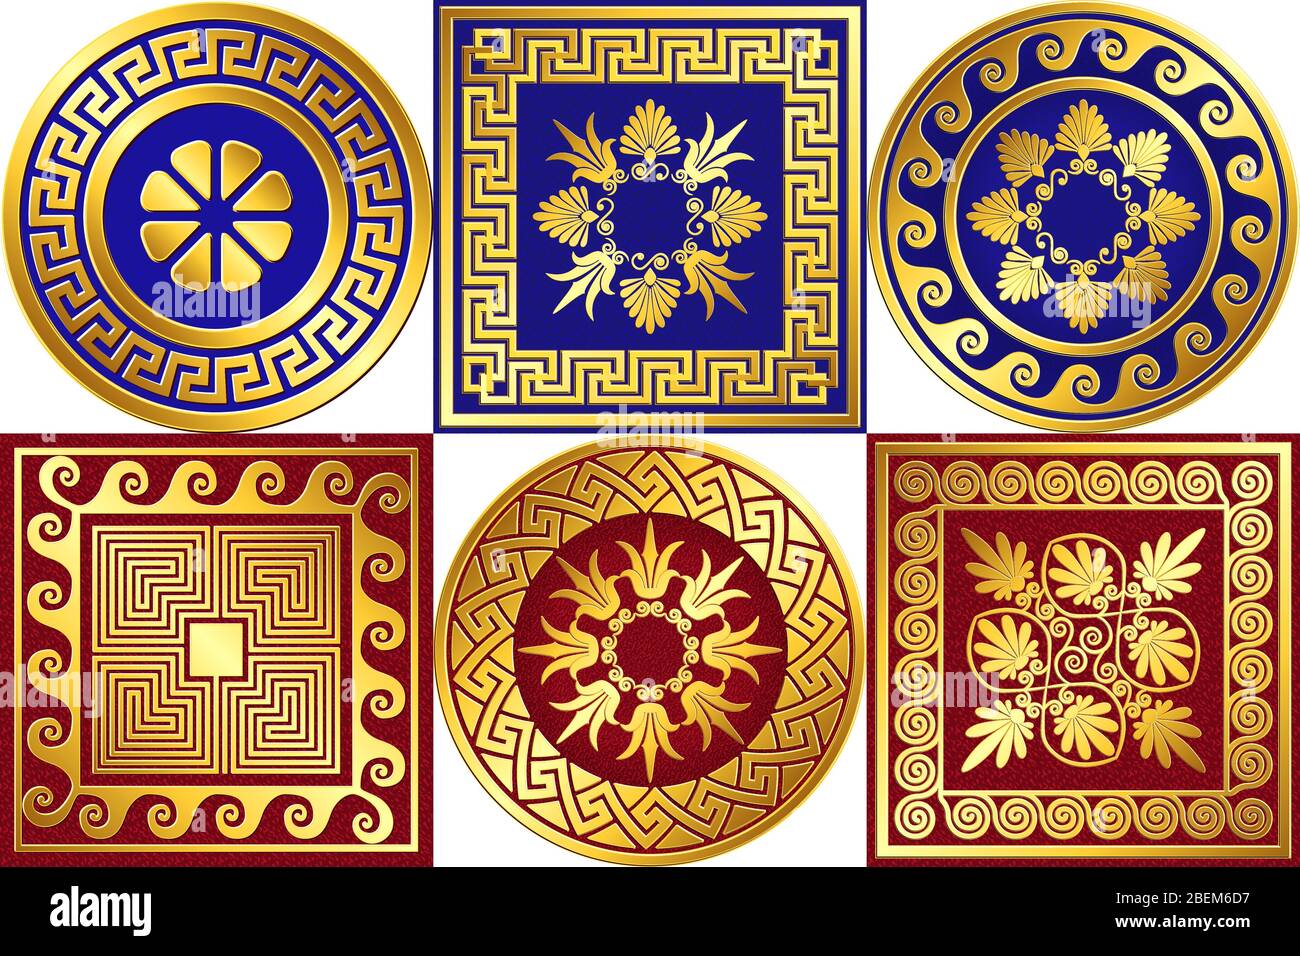 Set of Traditional vintage Golden square and round Greek ornament, Meander and floral pattern on red and blue background. Stock Vector